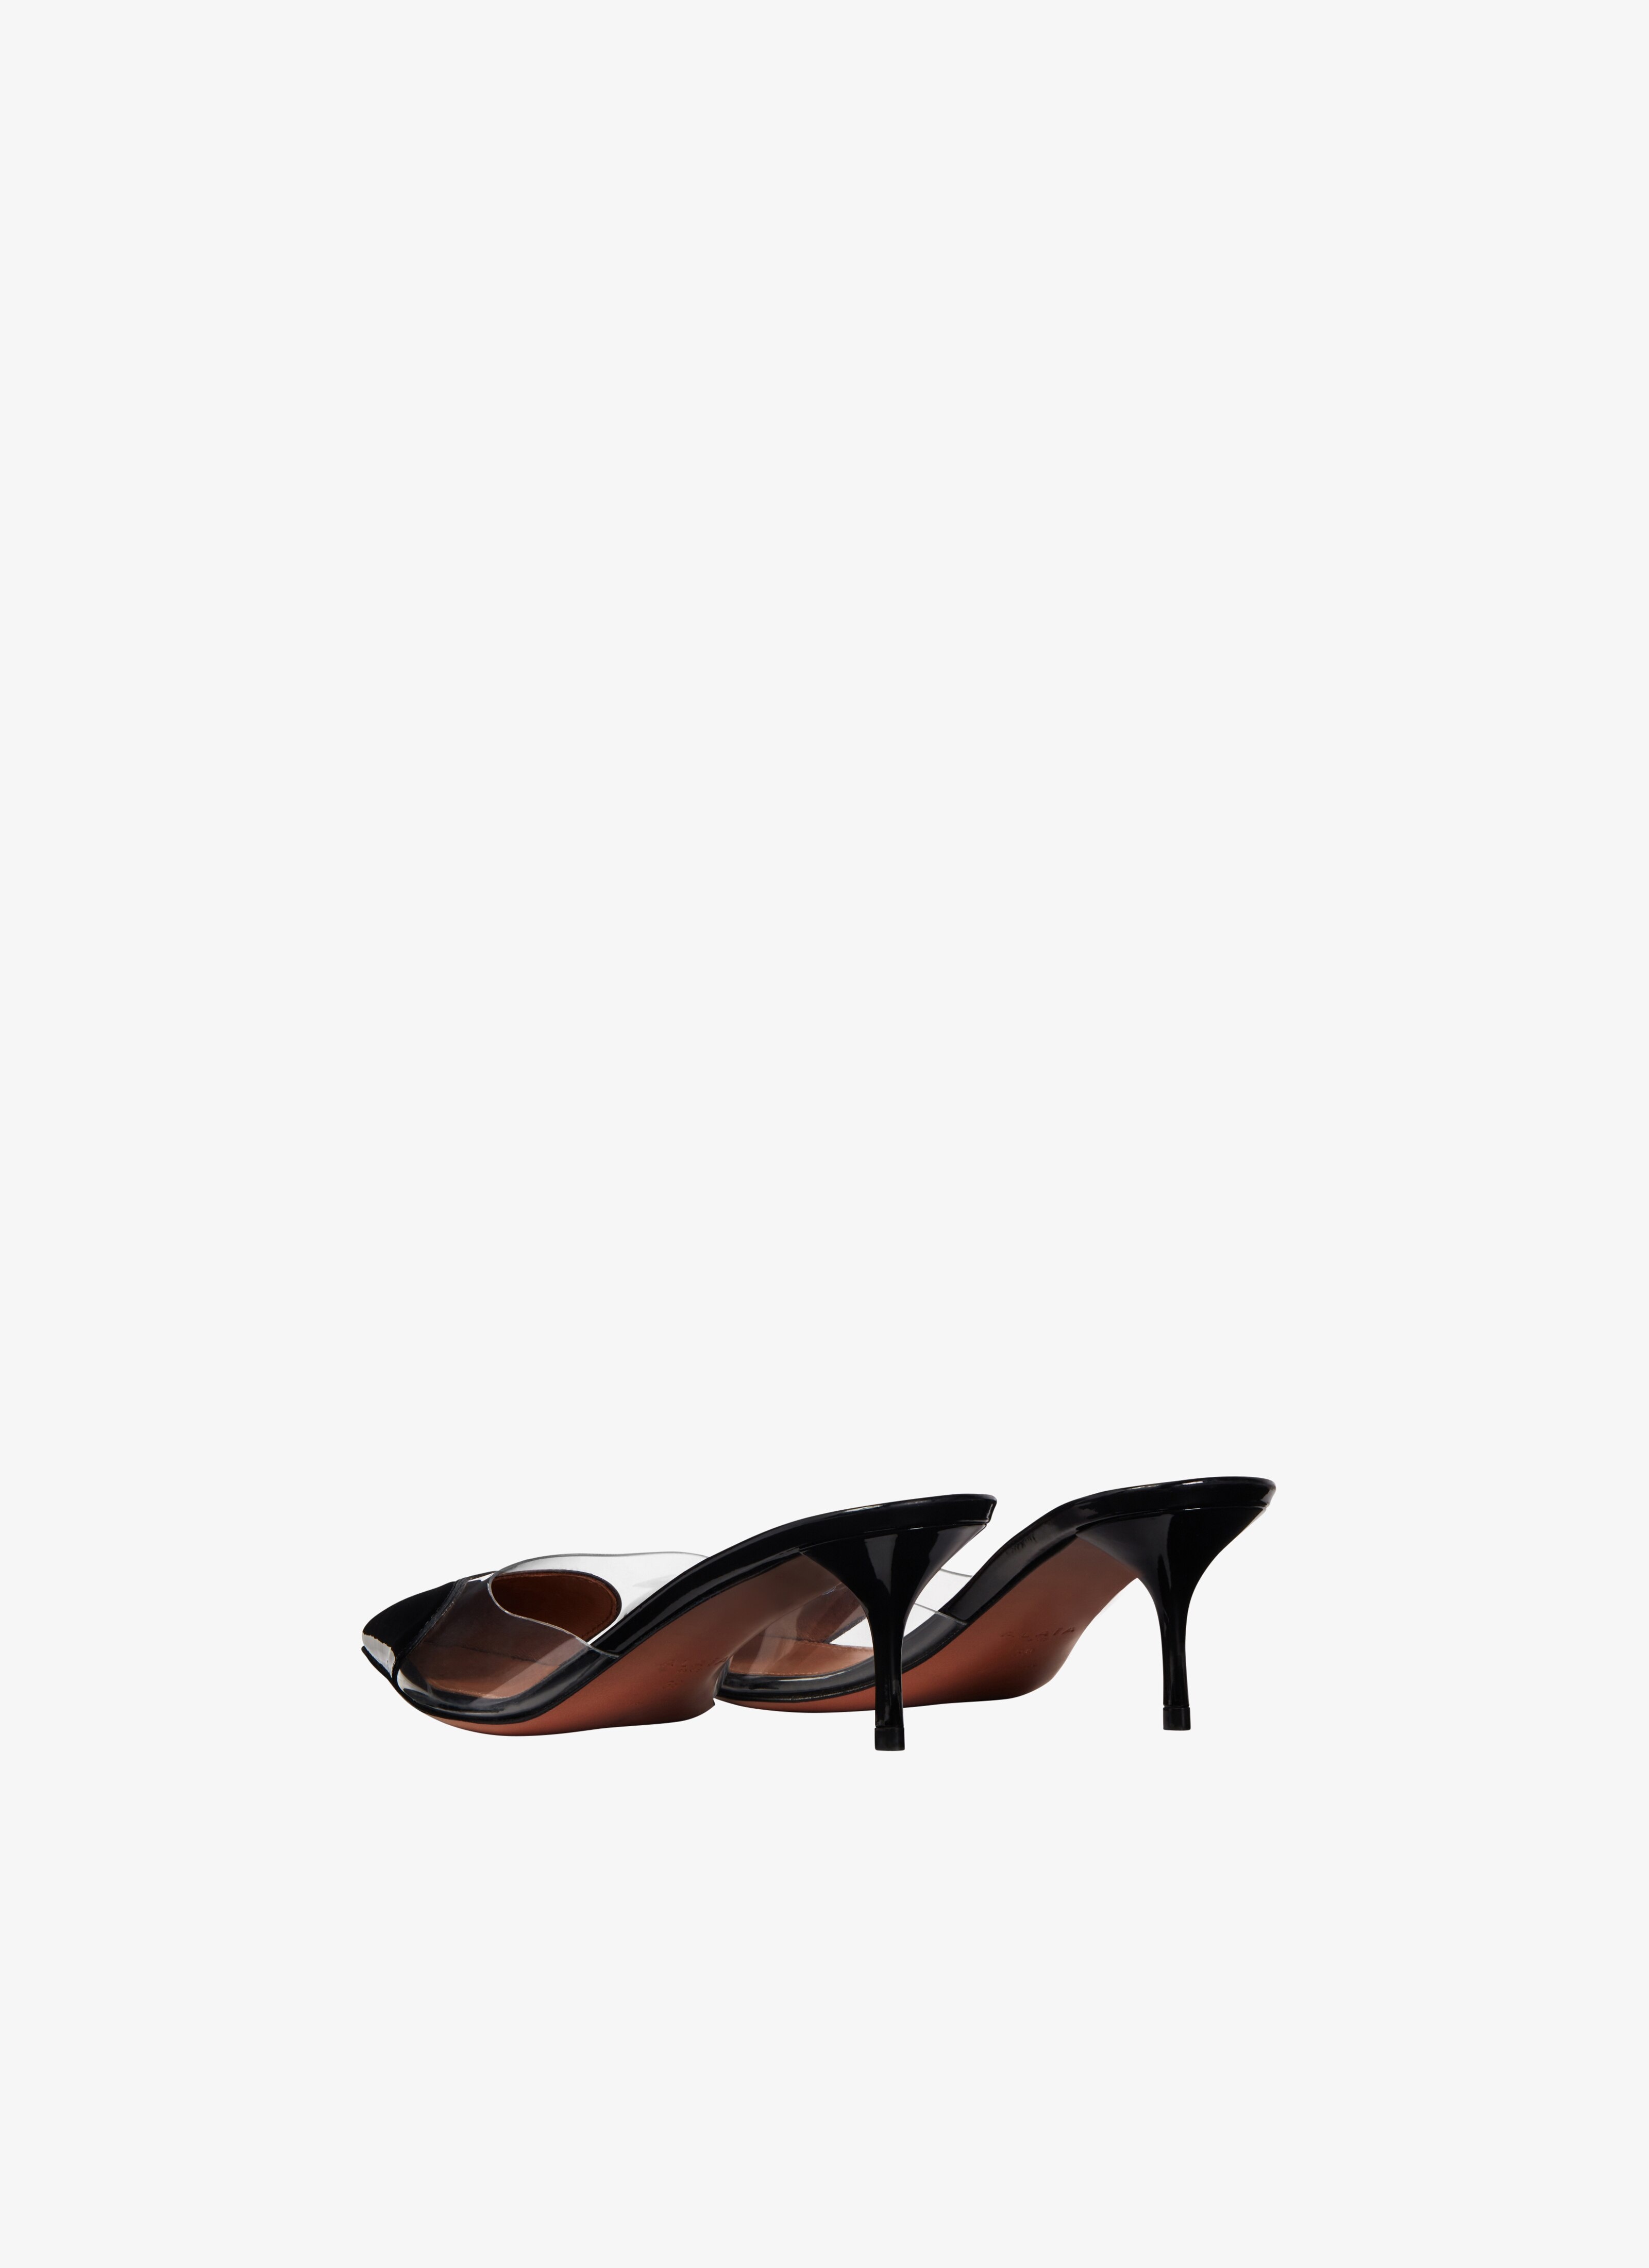 Coeur Patent Leather And PU Mules in Black - Alaia